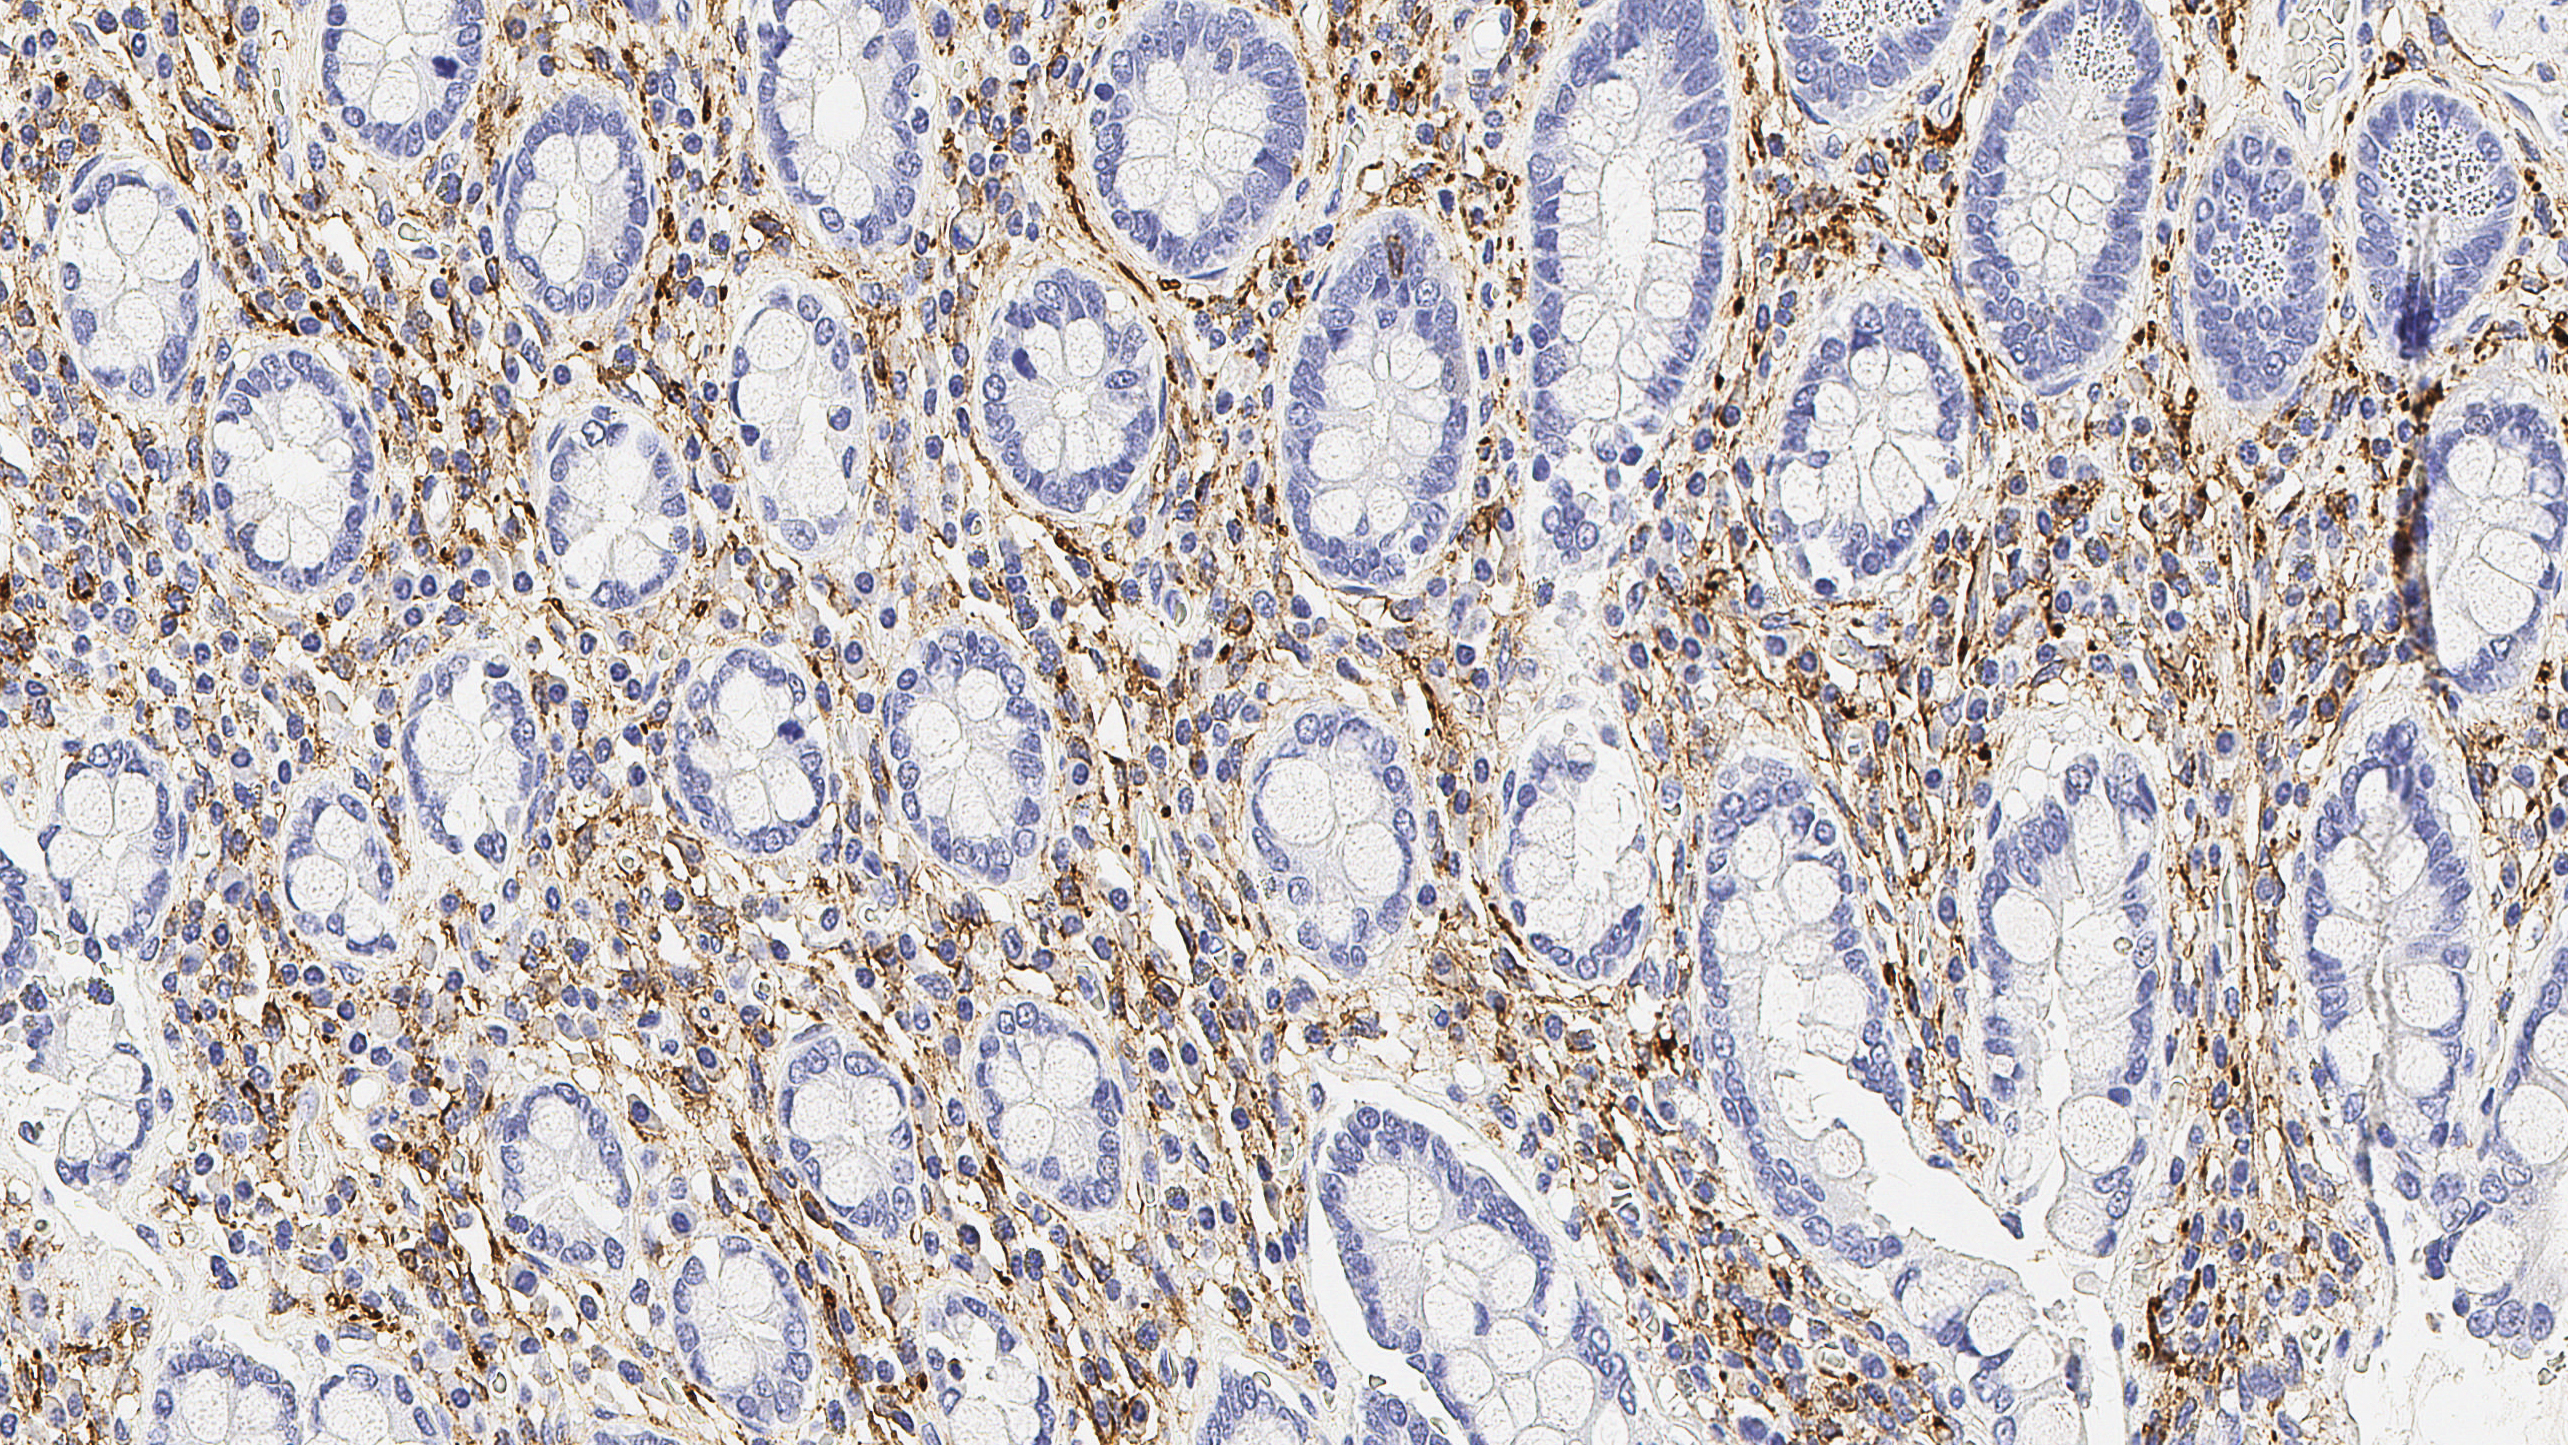 Human tonsil: immunohistochemical staining for CD56. Note the NK cells and CD4/CD8 double positive T cells show a weak to moderate and distinct membrane staining reaction while the majority of lymphocytes are unstained. CD56: clone CD564